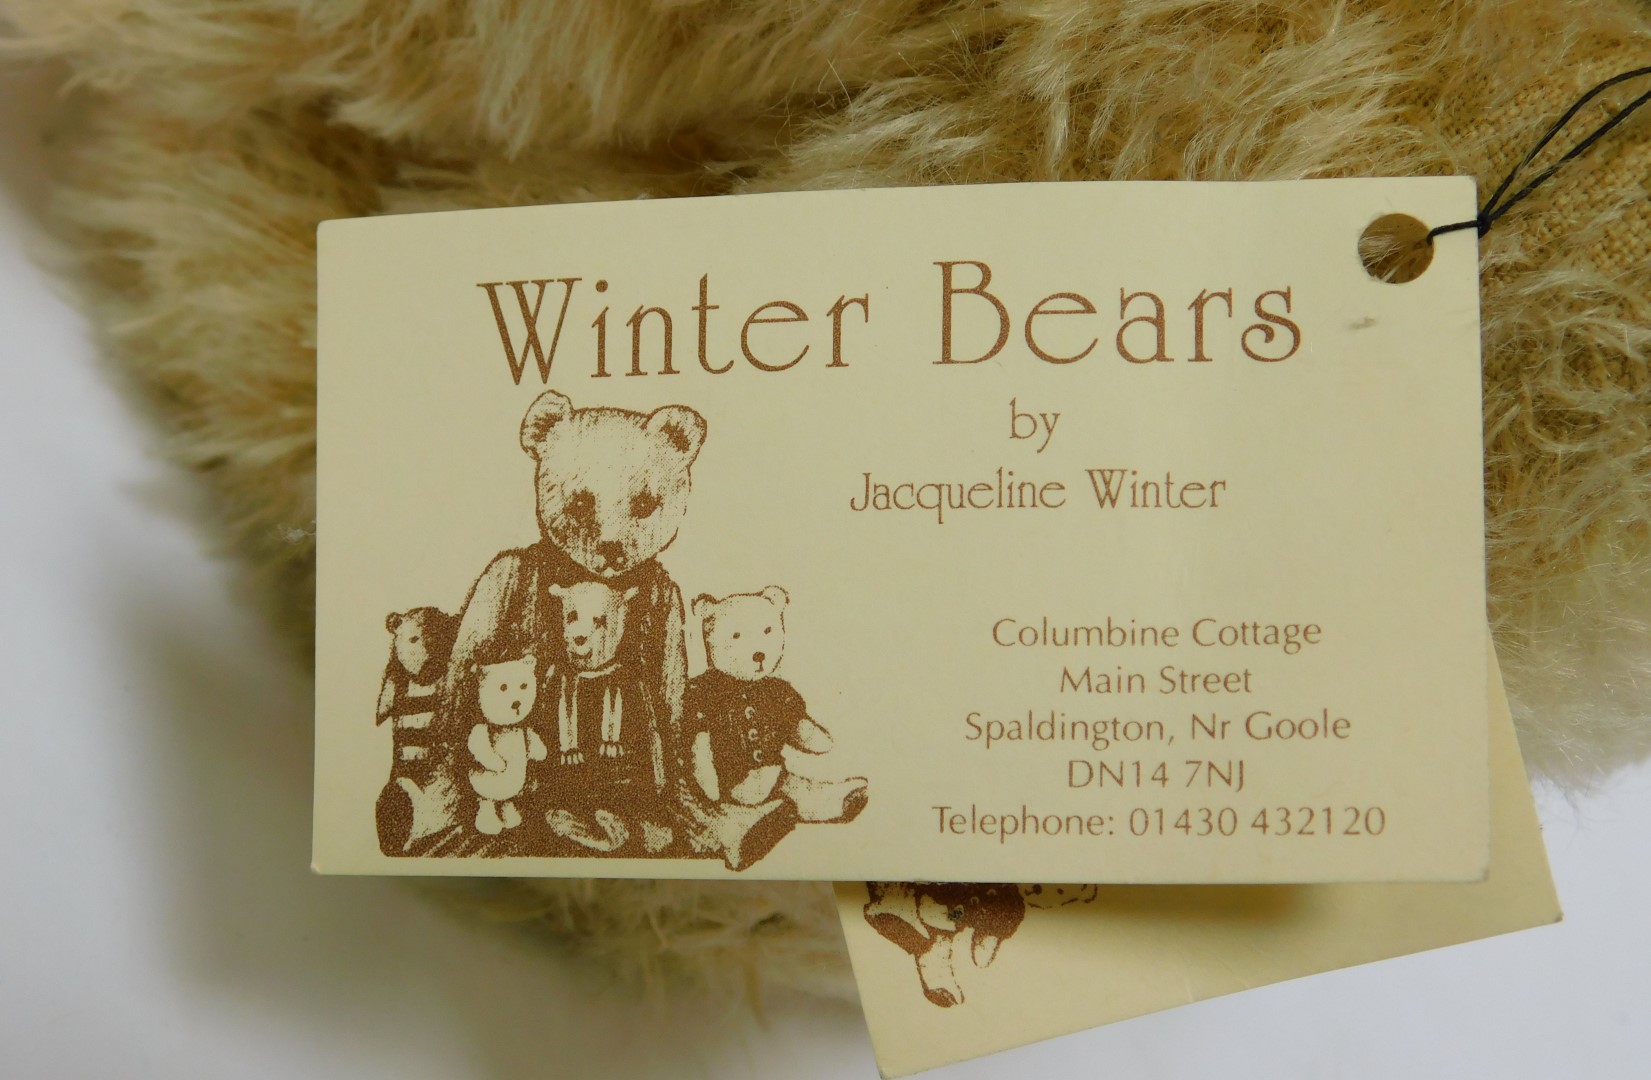 A Winter Bears by Jacqueline Winter mohair Teddy bear, named Dandelion, oatmeal colouring with leath - Image 2 of 4